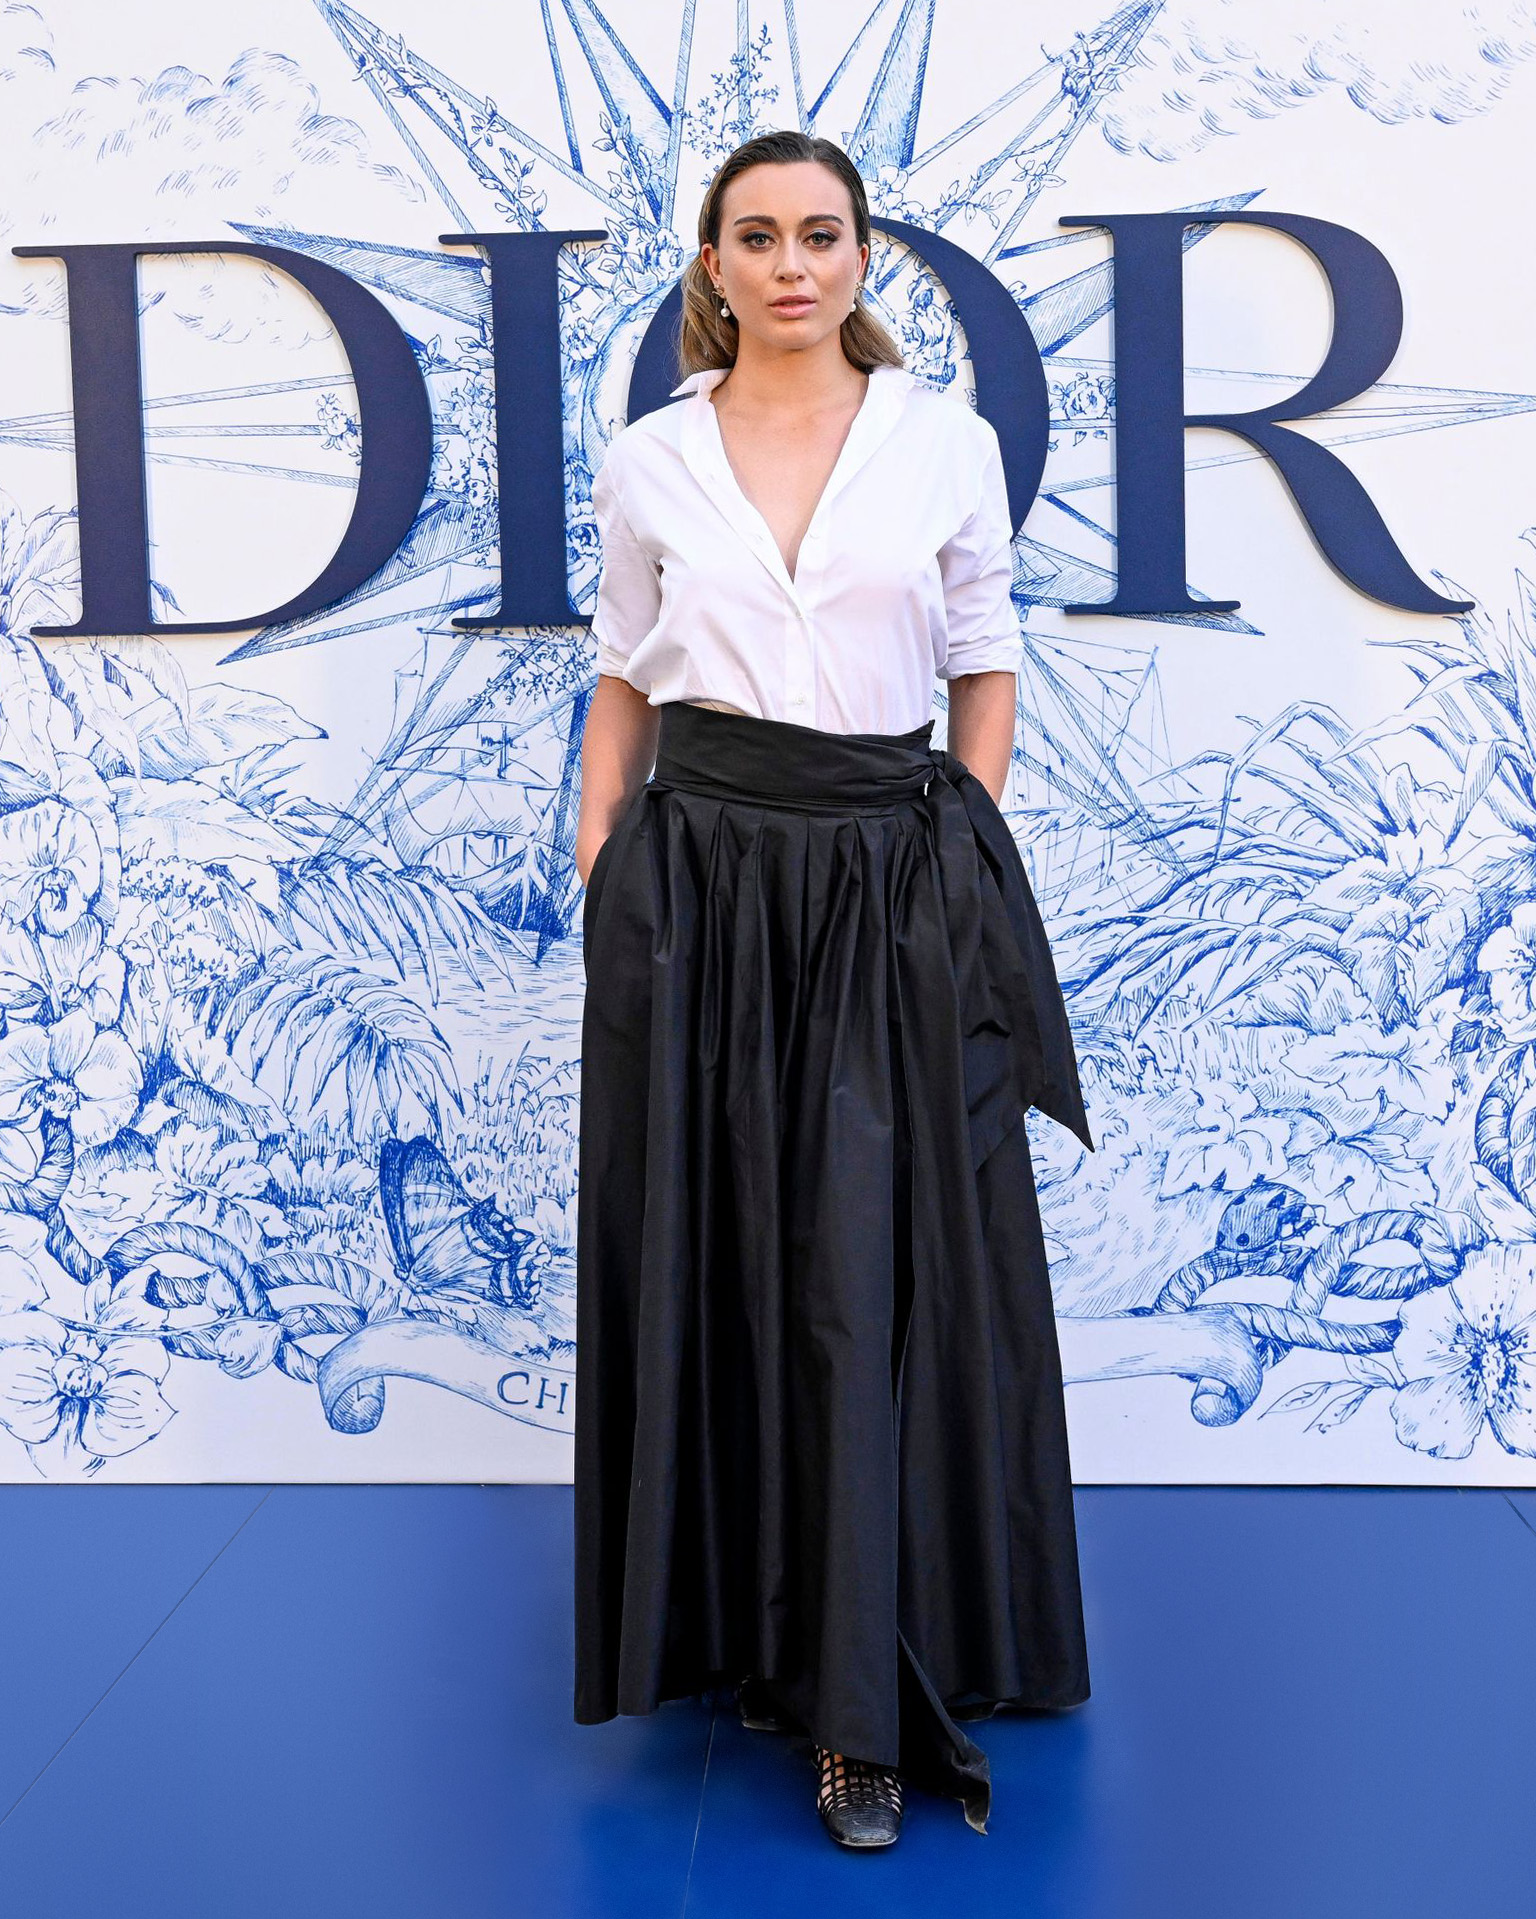 SEVILLE, SPAIN - JUNE 16: Paula Badosa attends &quot;Crucero Collection&quot; fashion show presentation by Dior at Plaza de España on June 16, 2022 in Seville, Spain. (Photo by Carlos Alvarez/Getty Images for Dior)